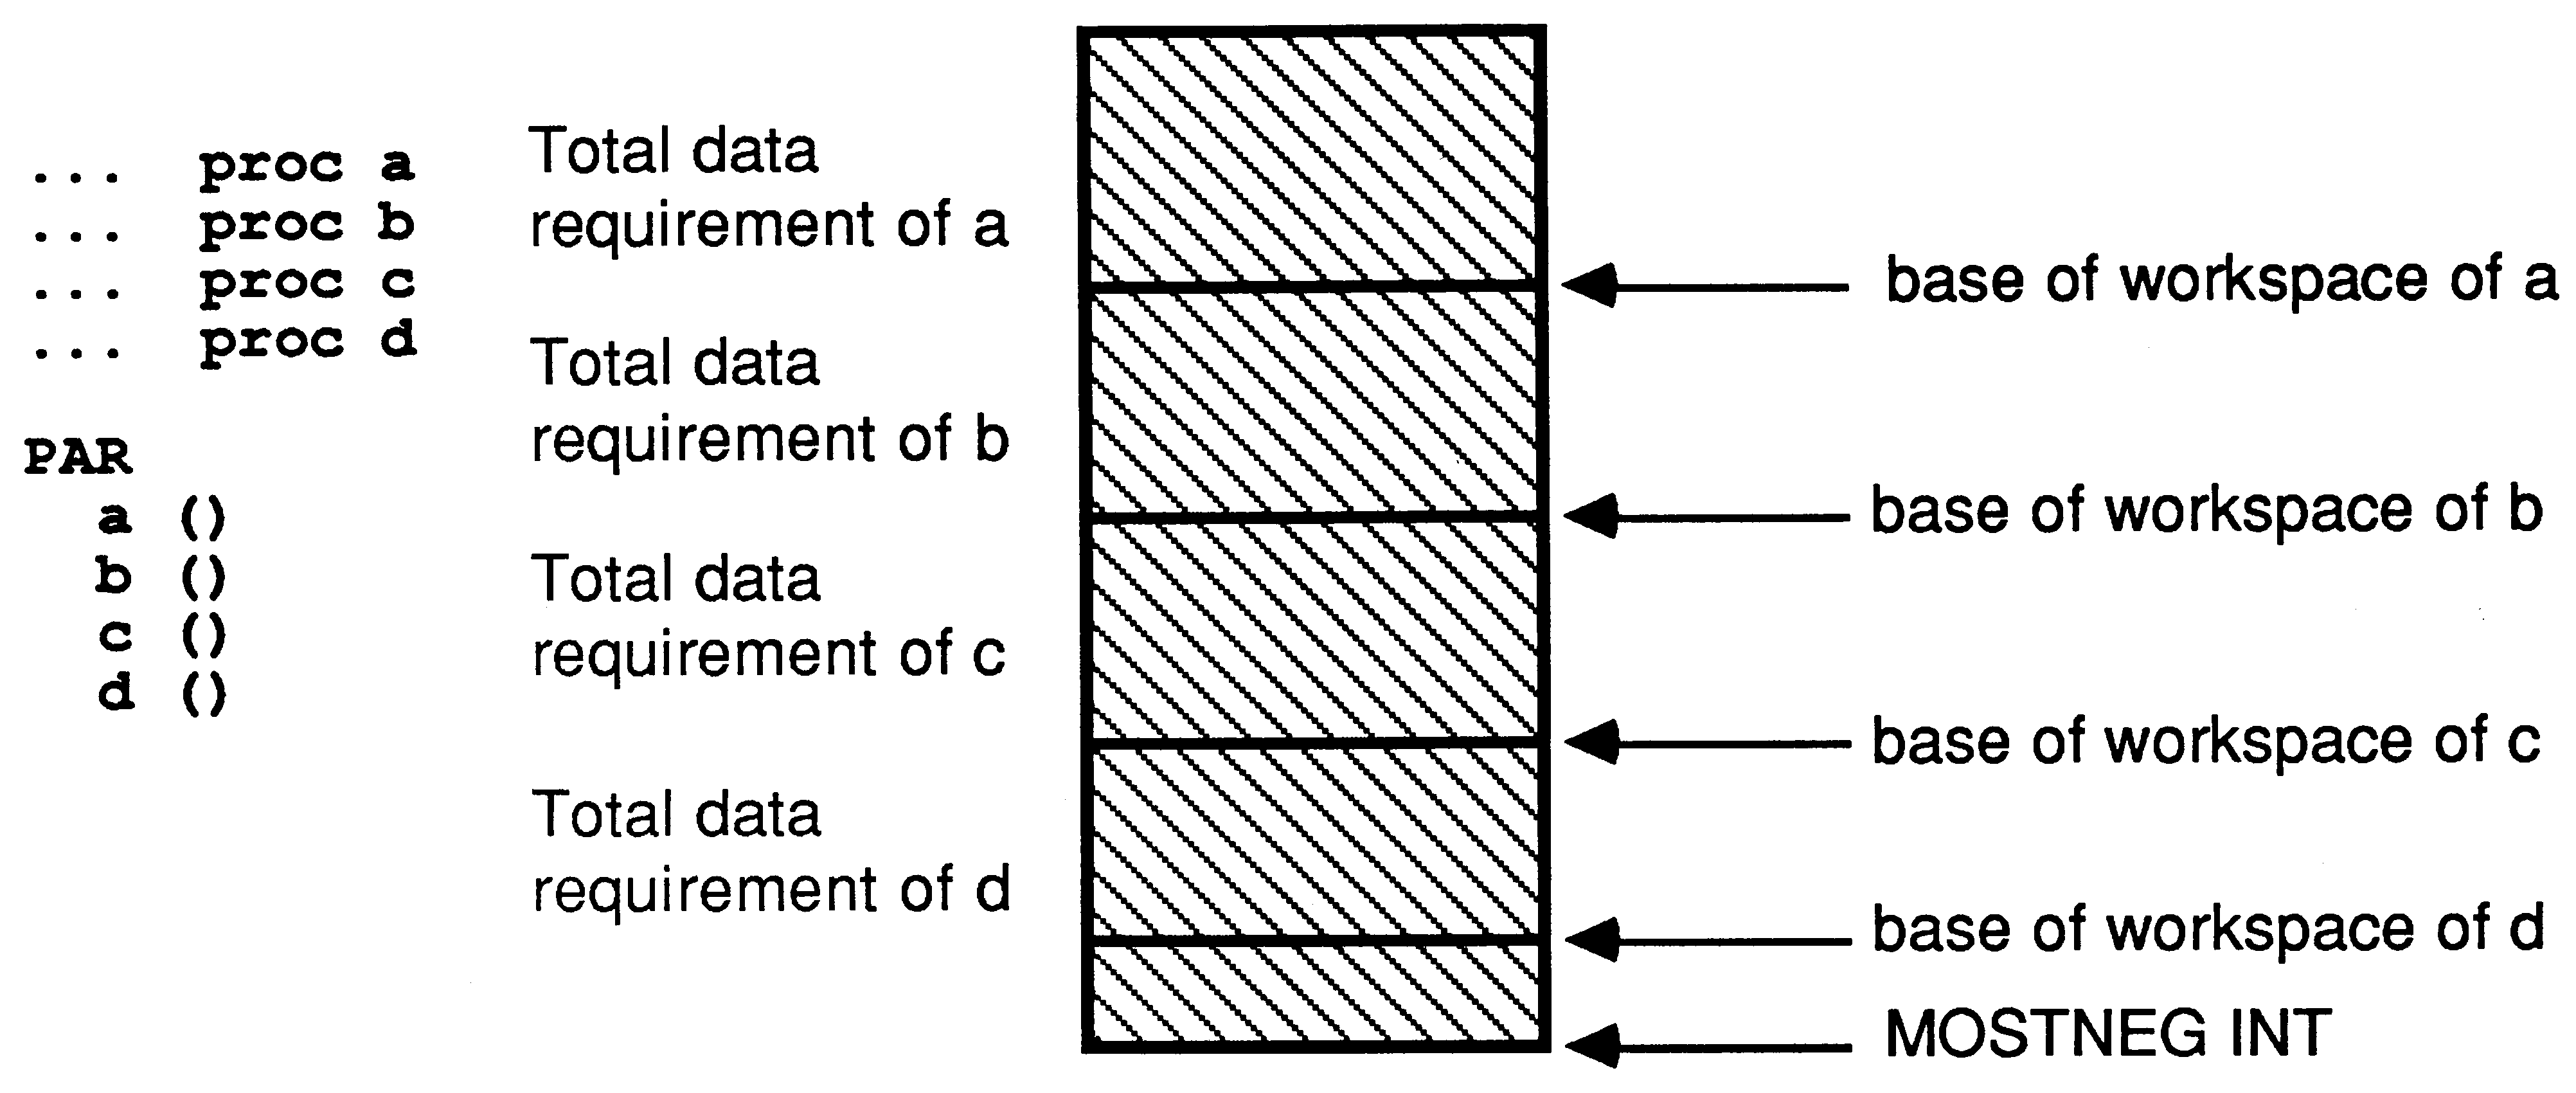 Workspace layout of parallel
processes